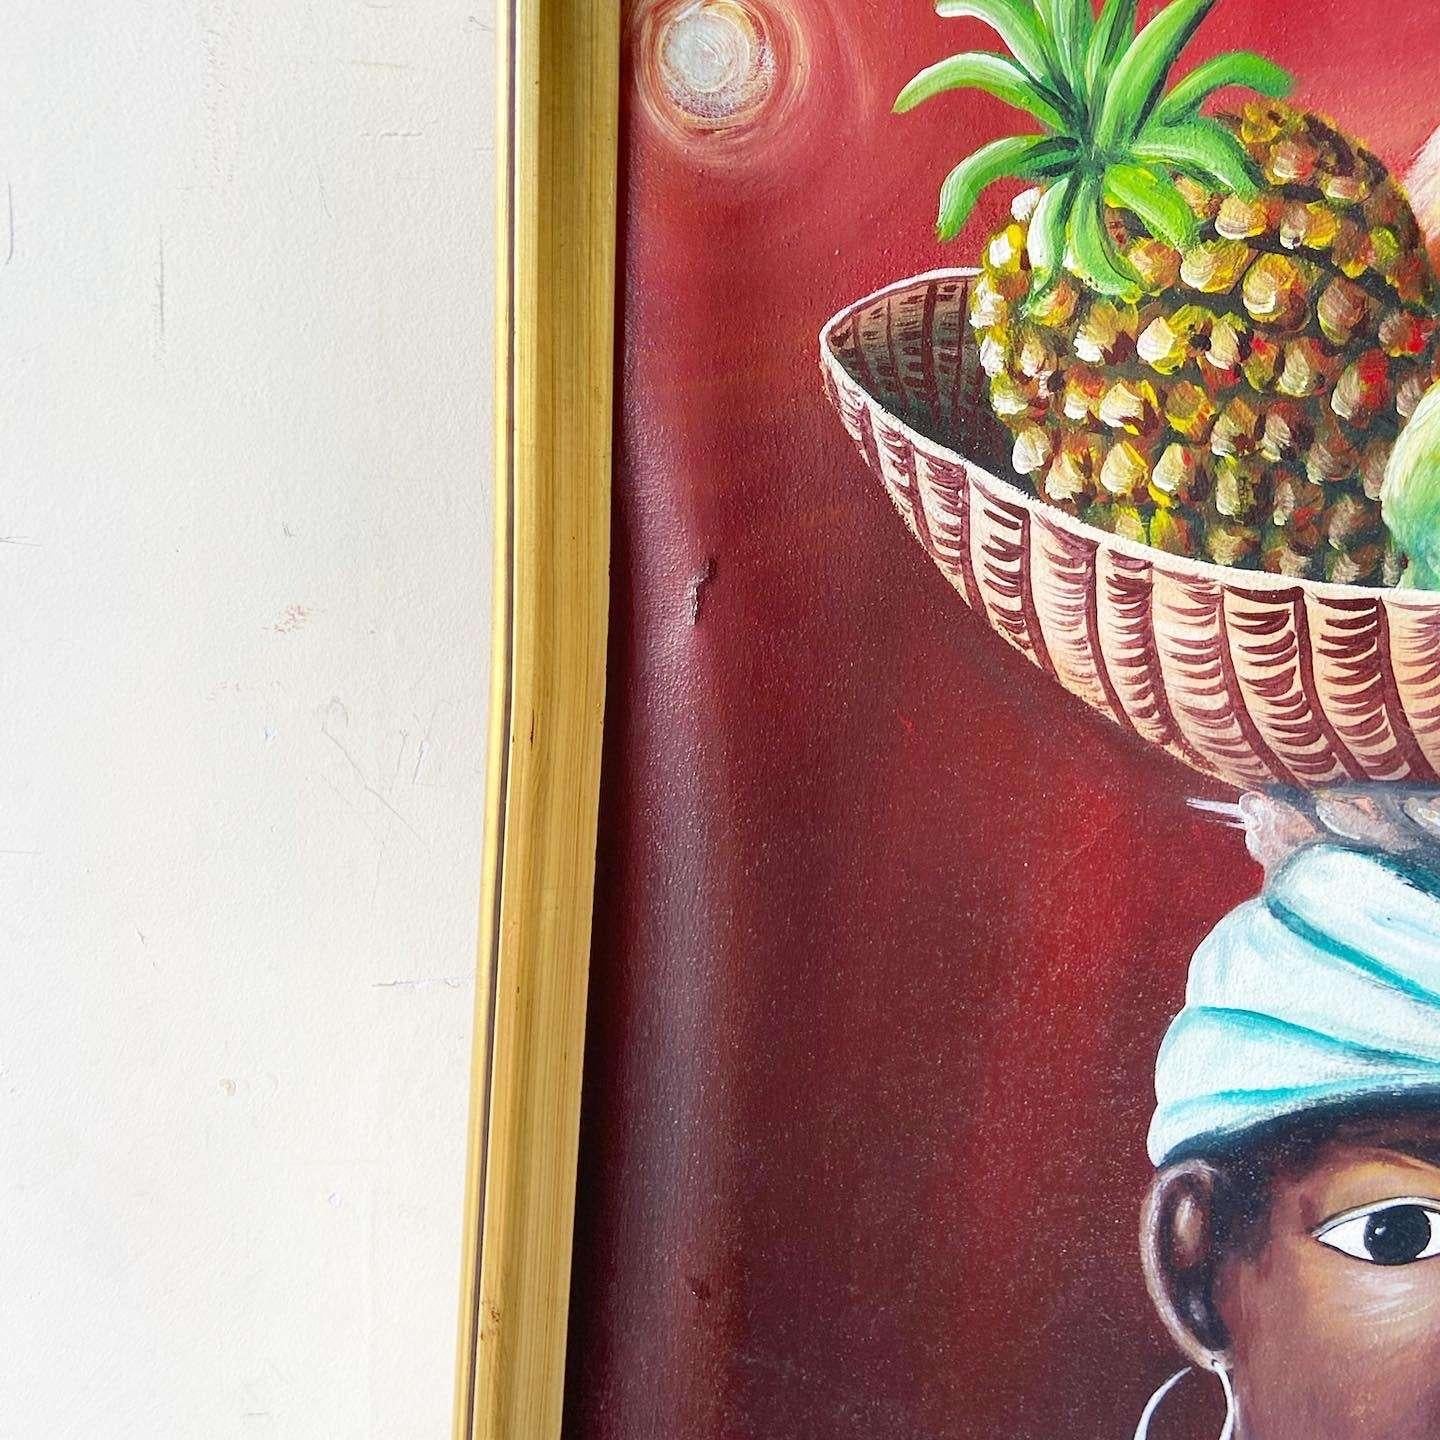 Canvas Original Framed Oil Painting of Caribbean Woman With Fruit Bowl by Scroggin For Sale